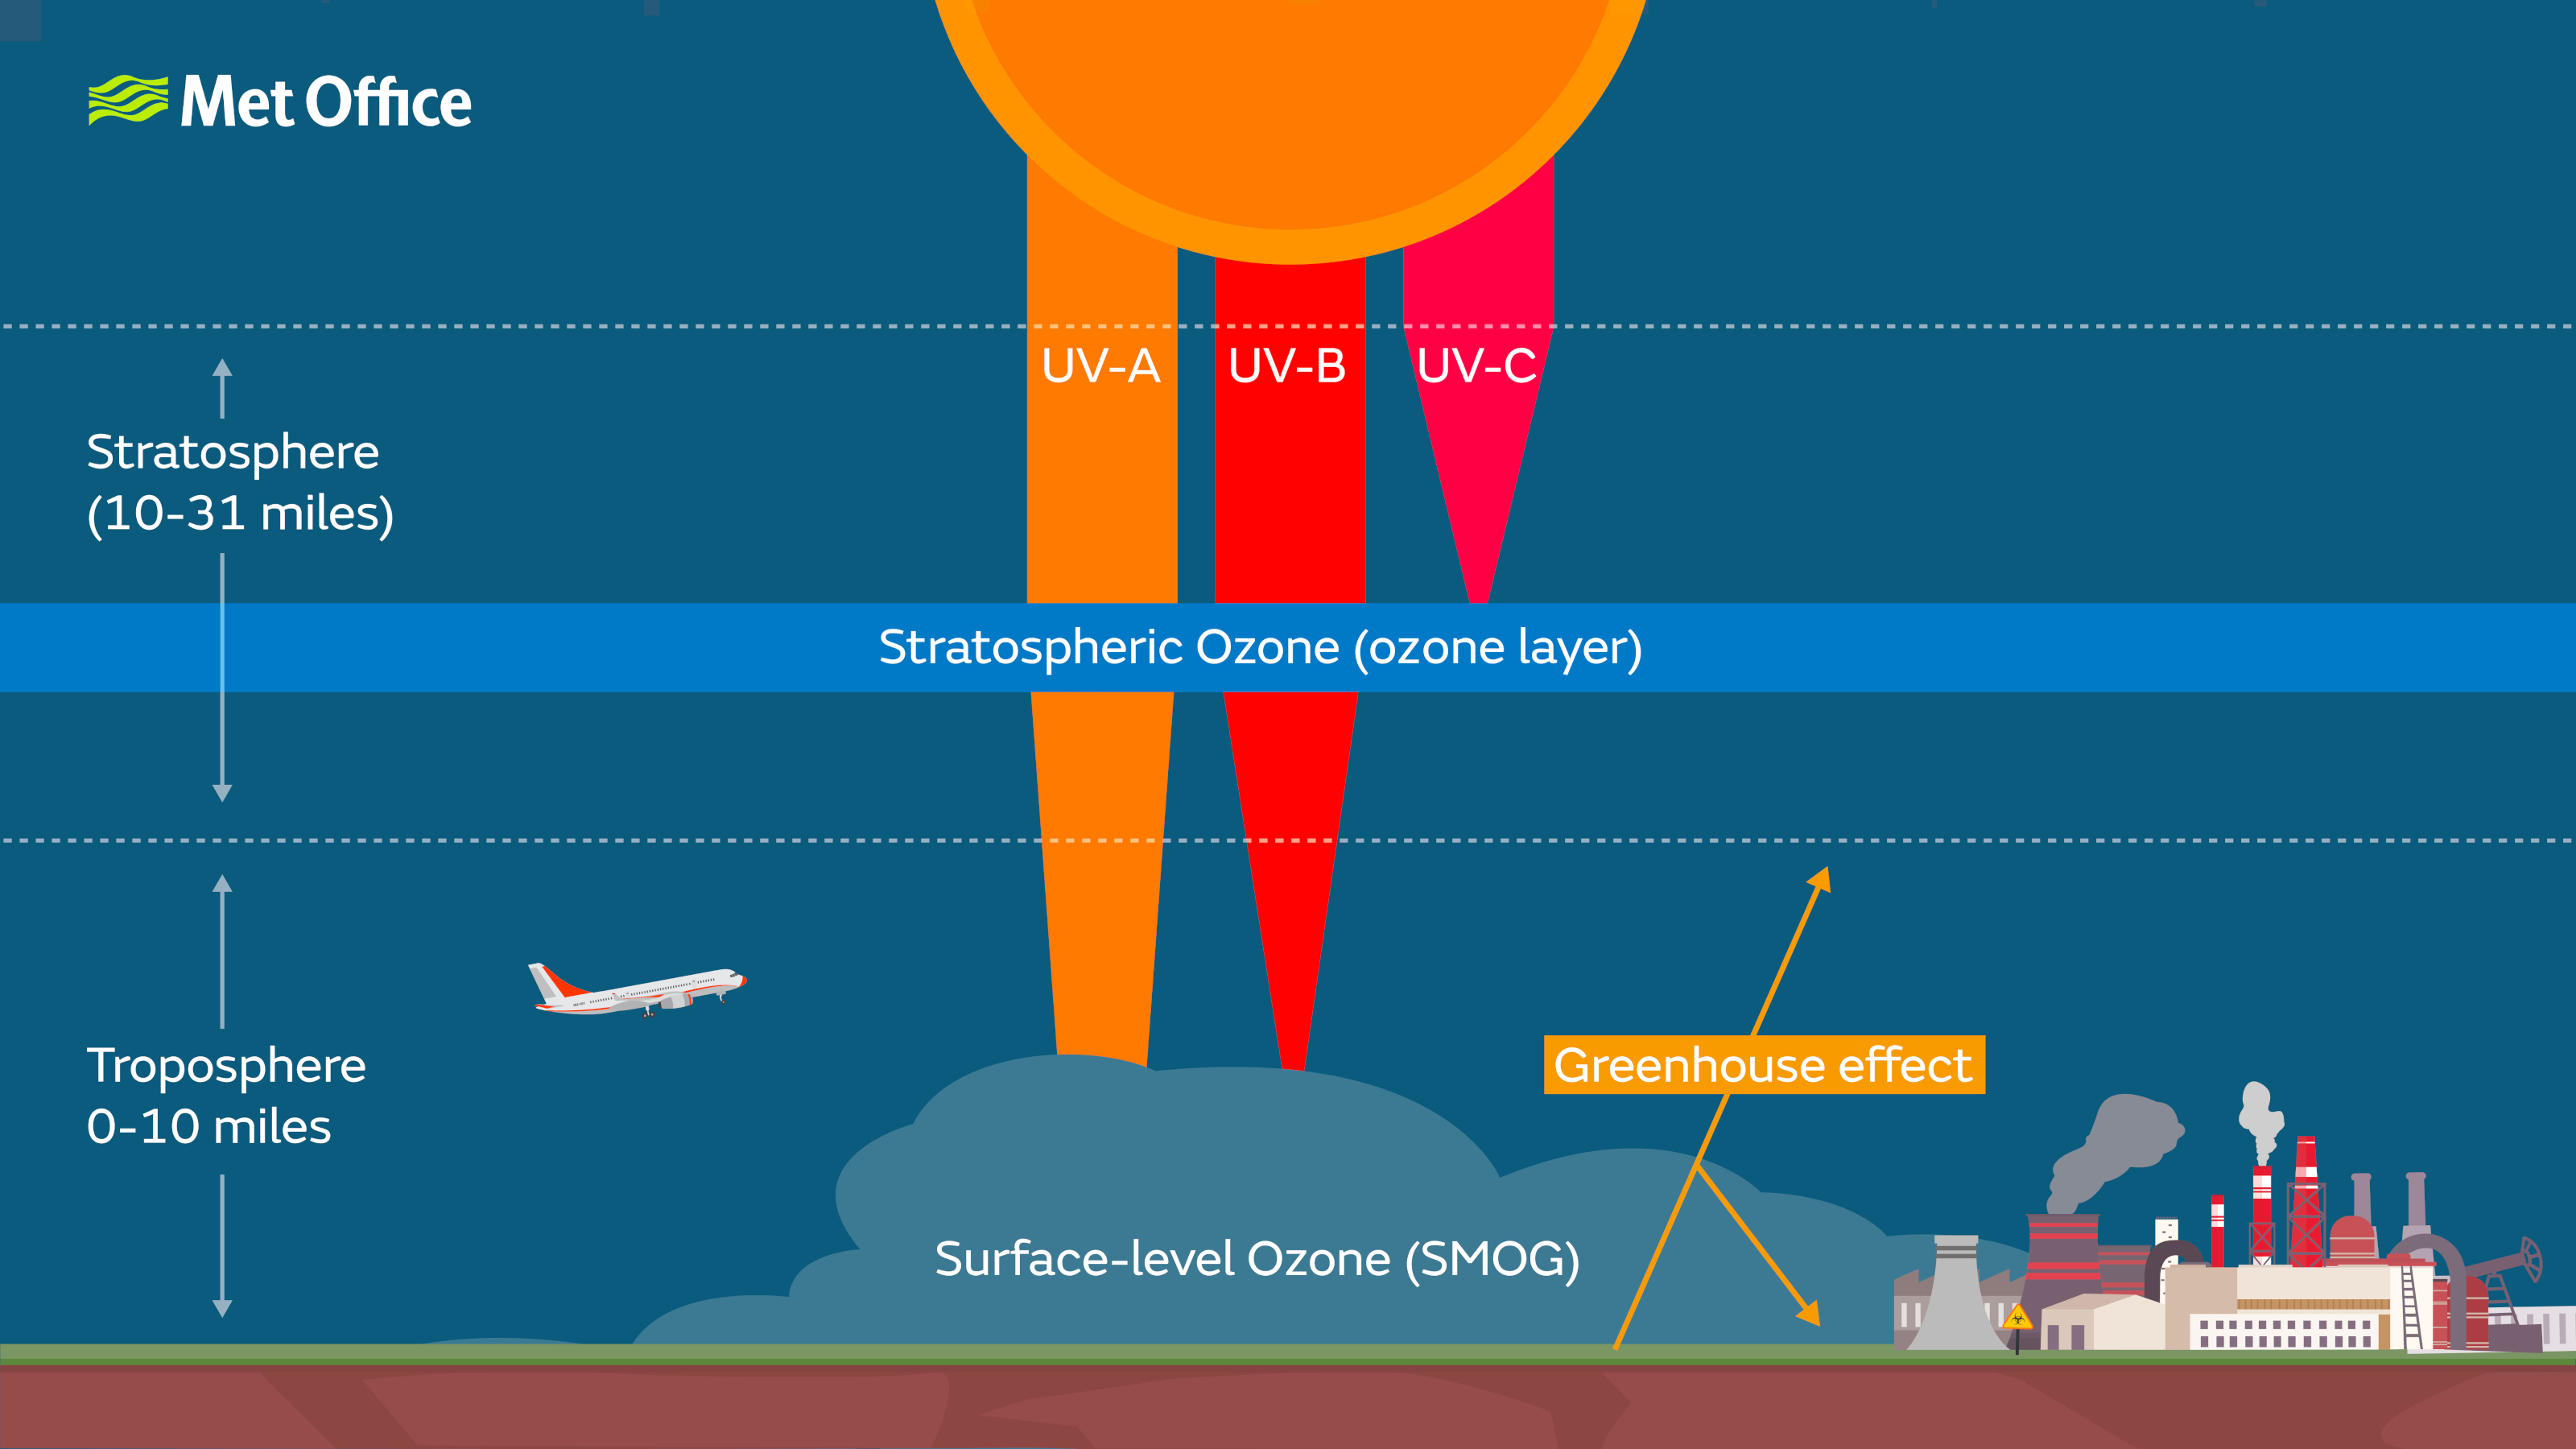 A diagram showing the ozone layer in the stratosphere, filtering out the UV-C and most of the UV-B radiation from the Sun.